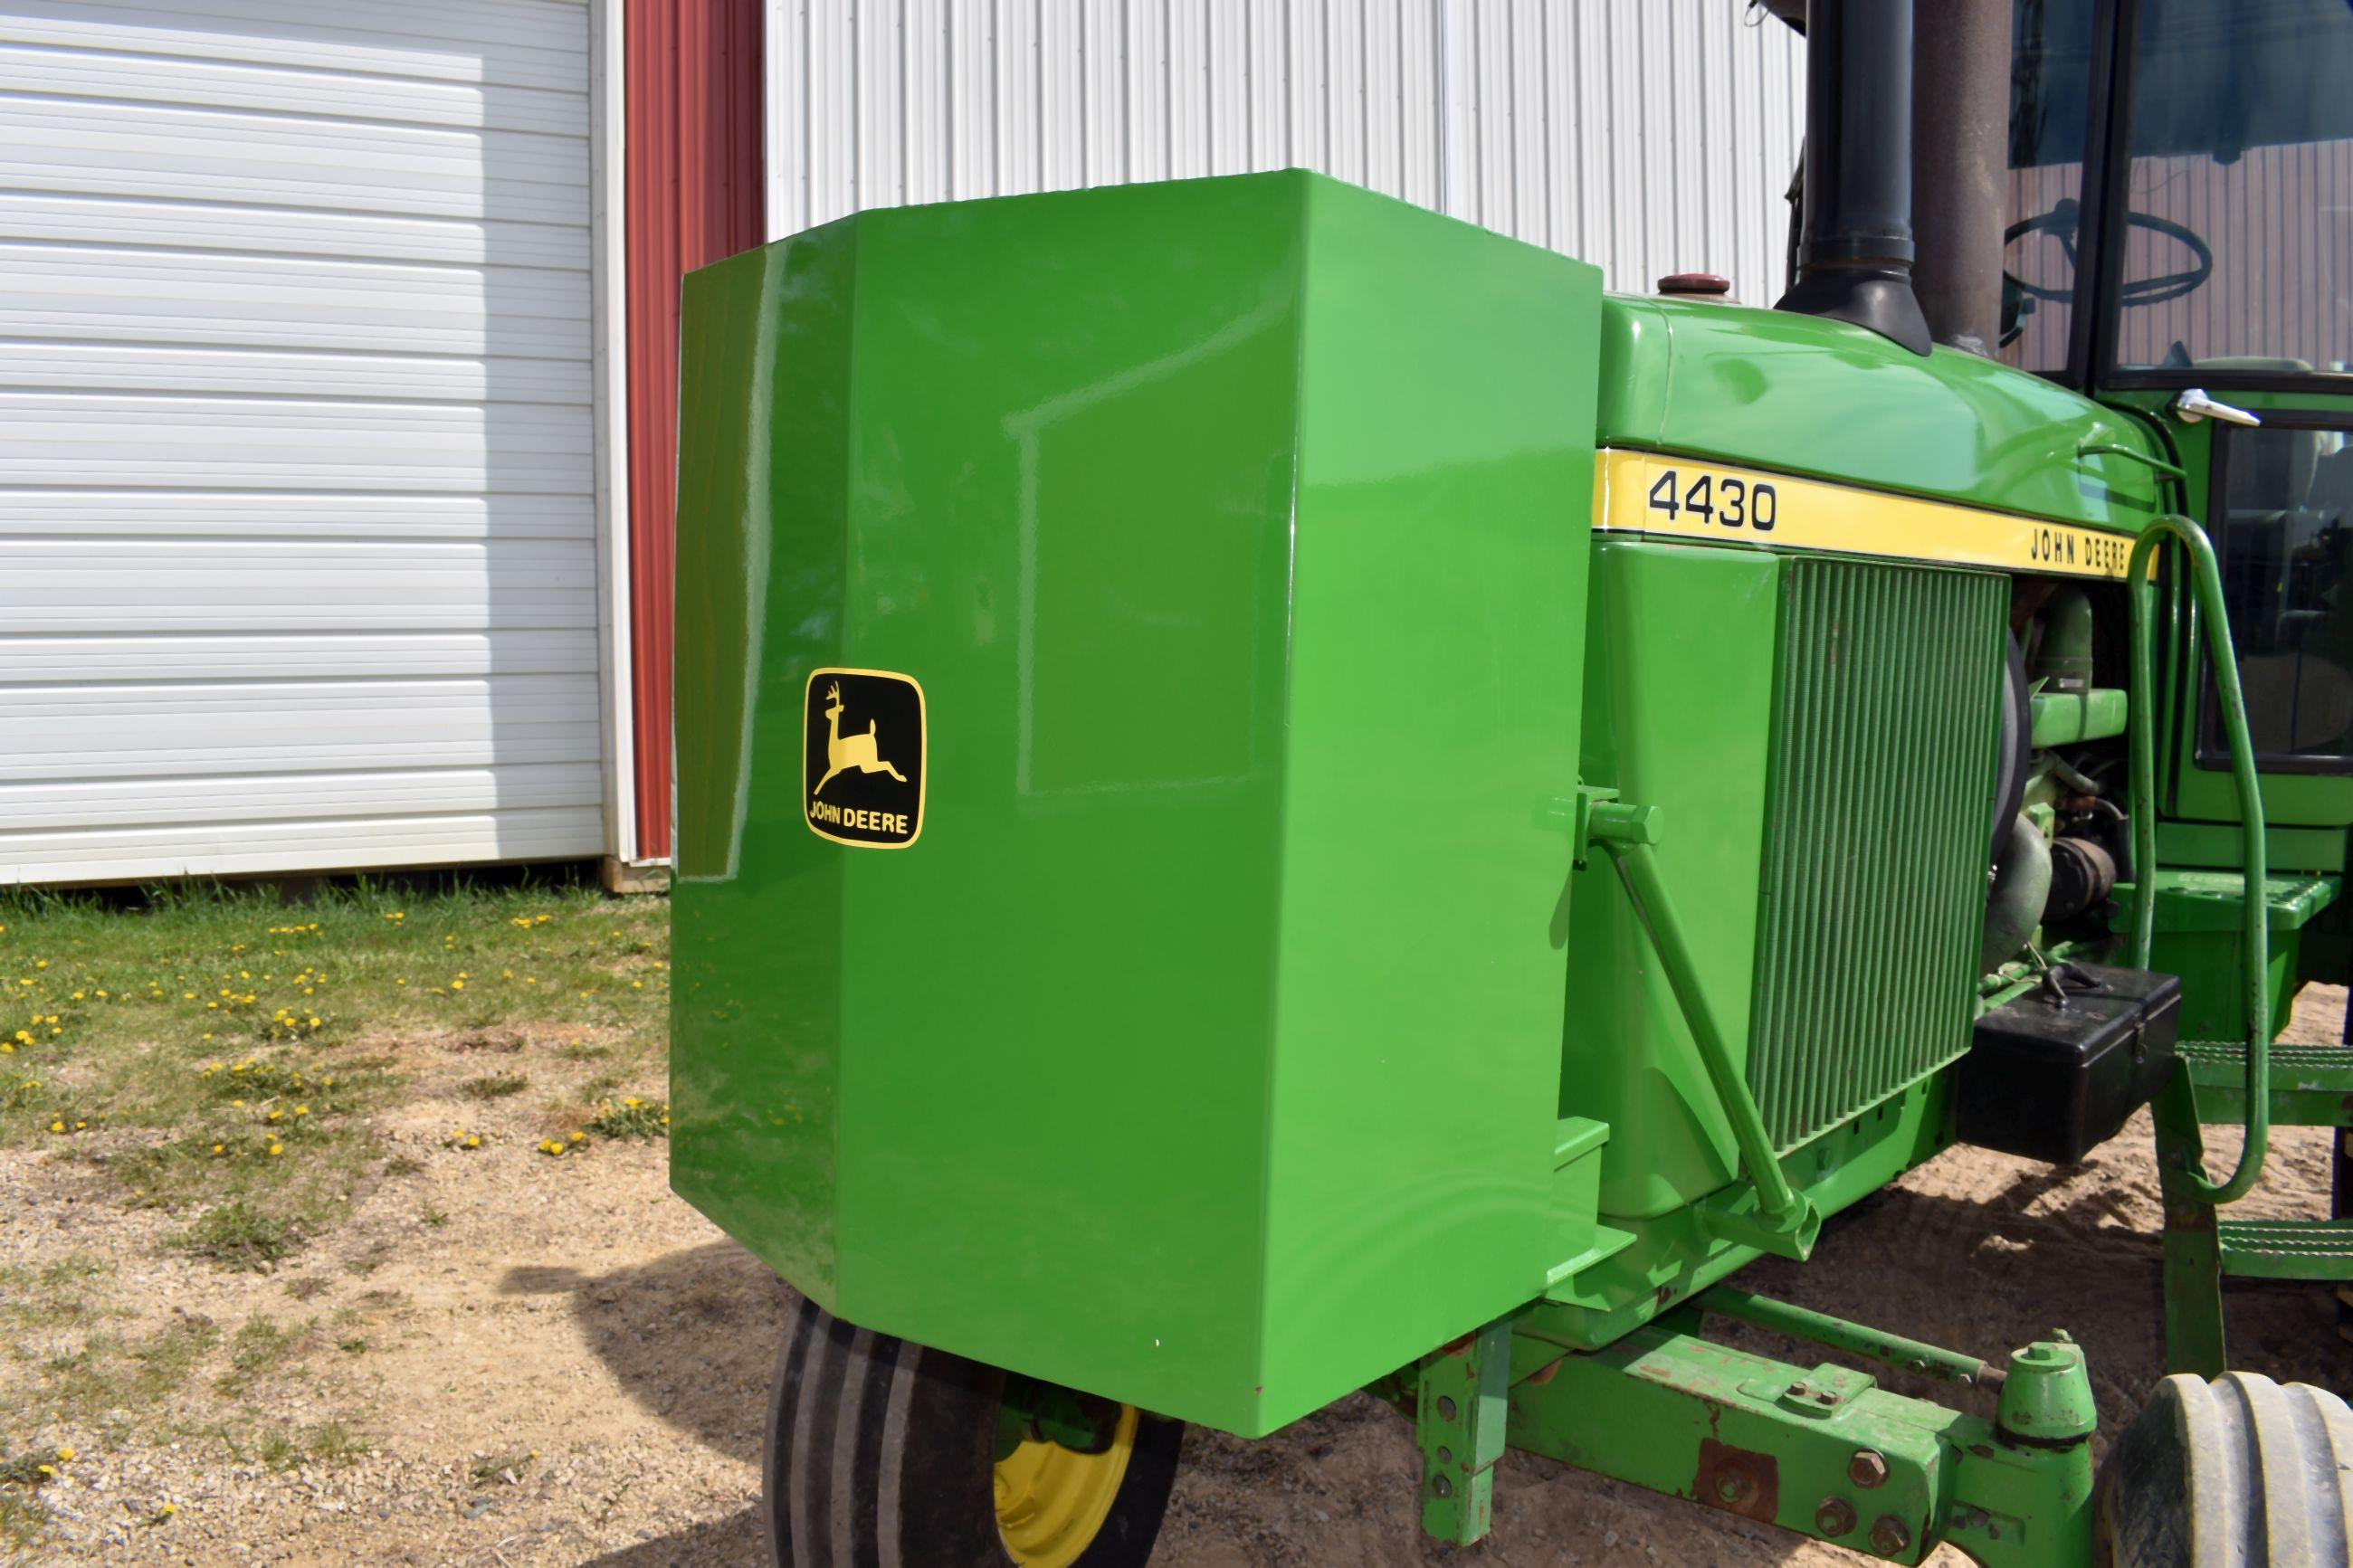 1977 John Deere 4430 2WD Tractor, 7701 Hours, 18.4x38 Tires At 80%, Extension Front Fuel Tank, Rear